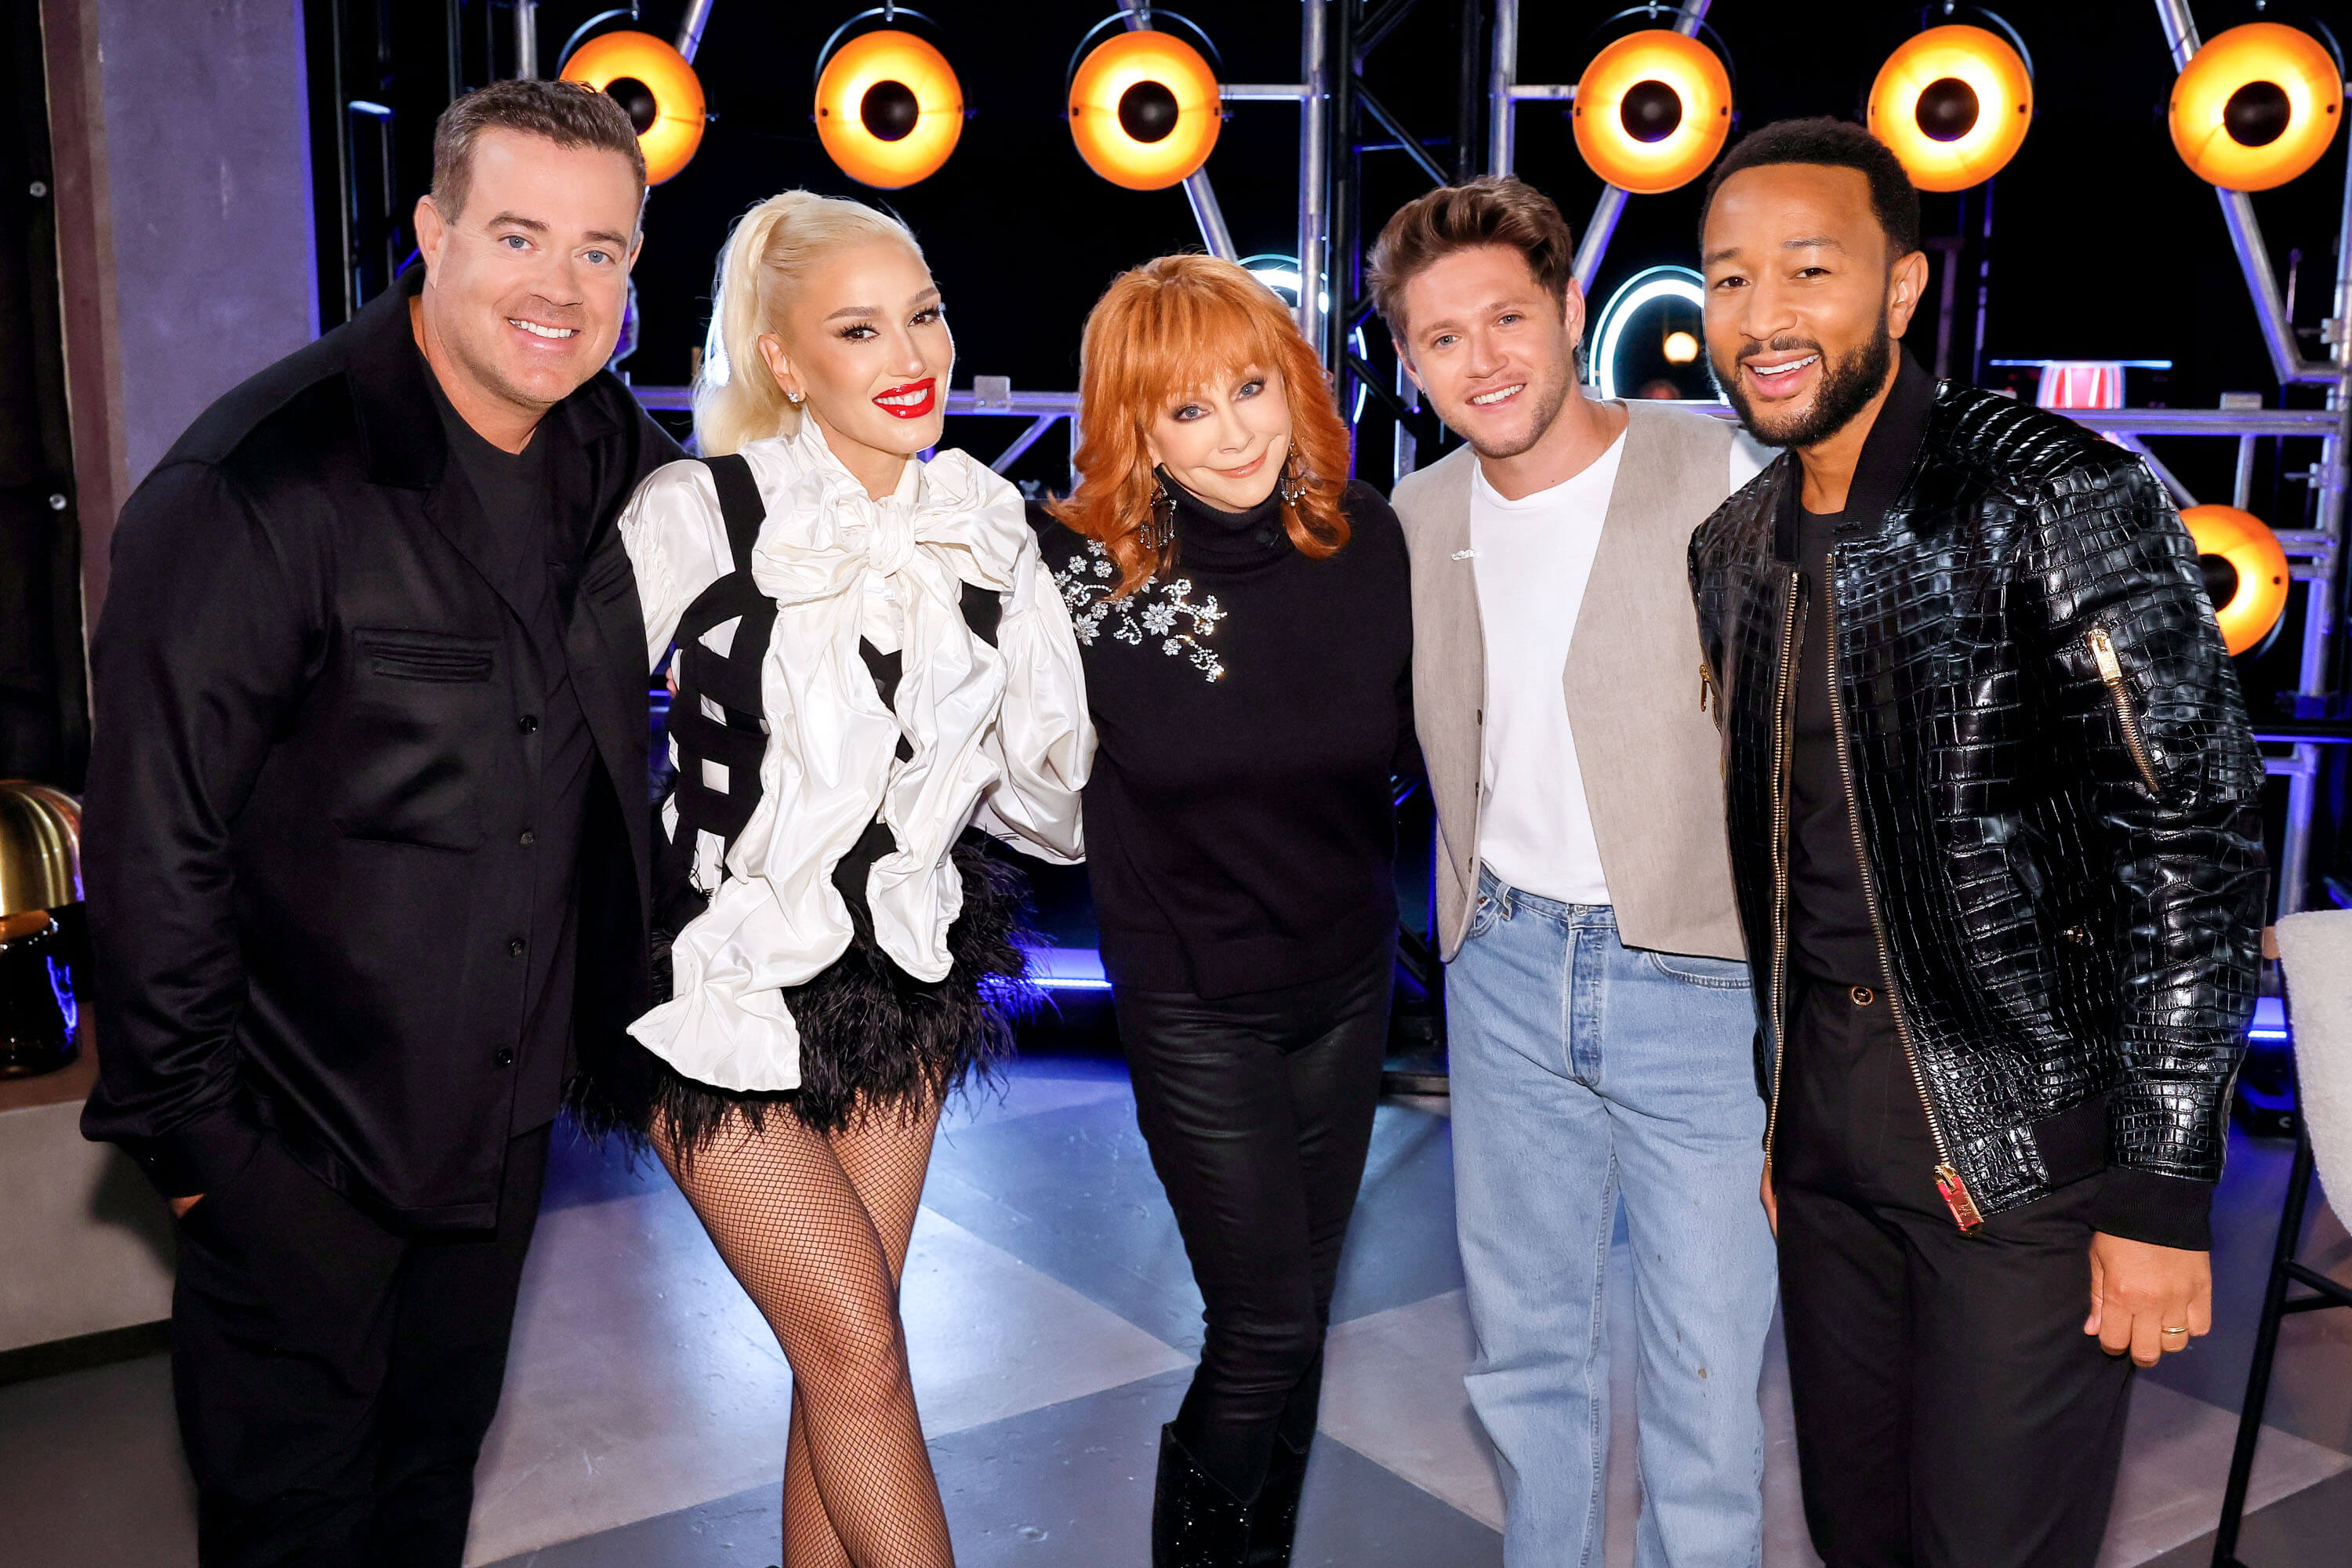 'The Voice' Season 24 host and coaches: Carson Daly, Gwen Stefani, Reba McEntire, Niall Horan, and John Legend